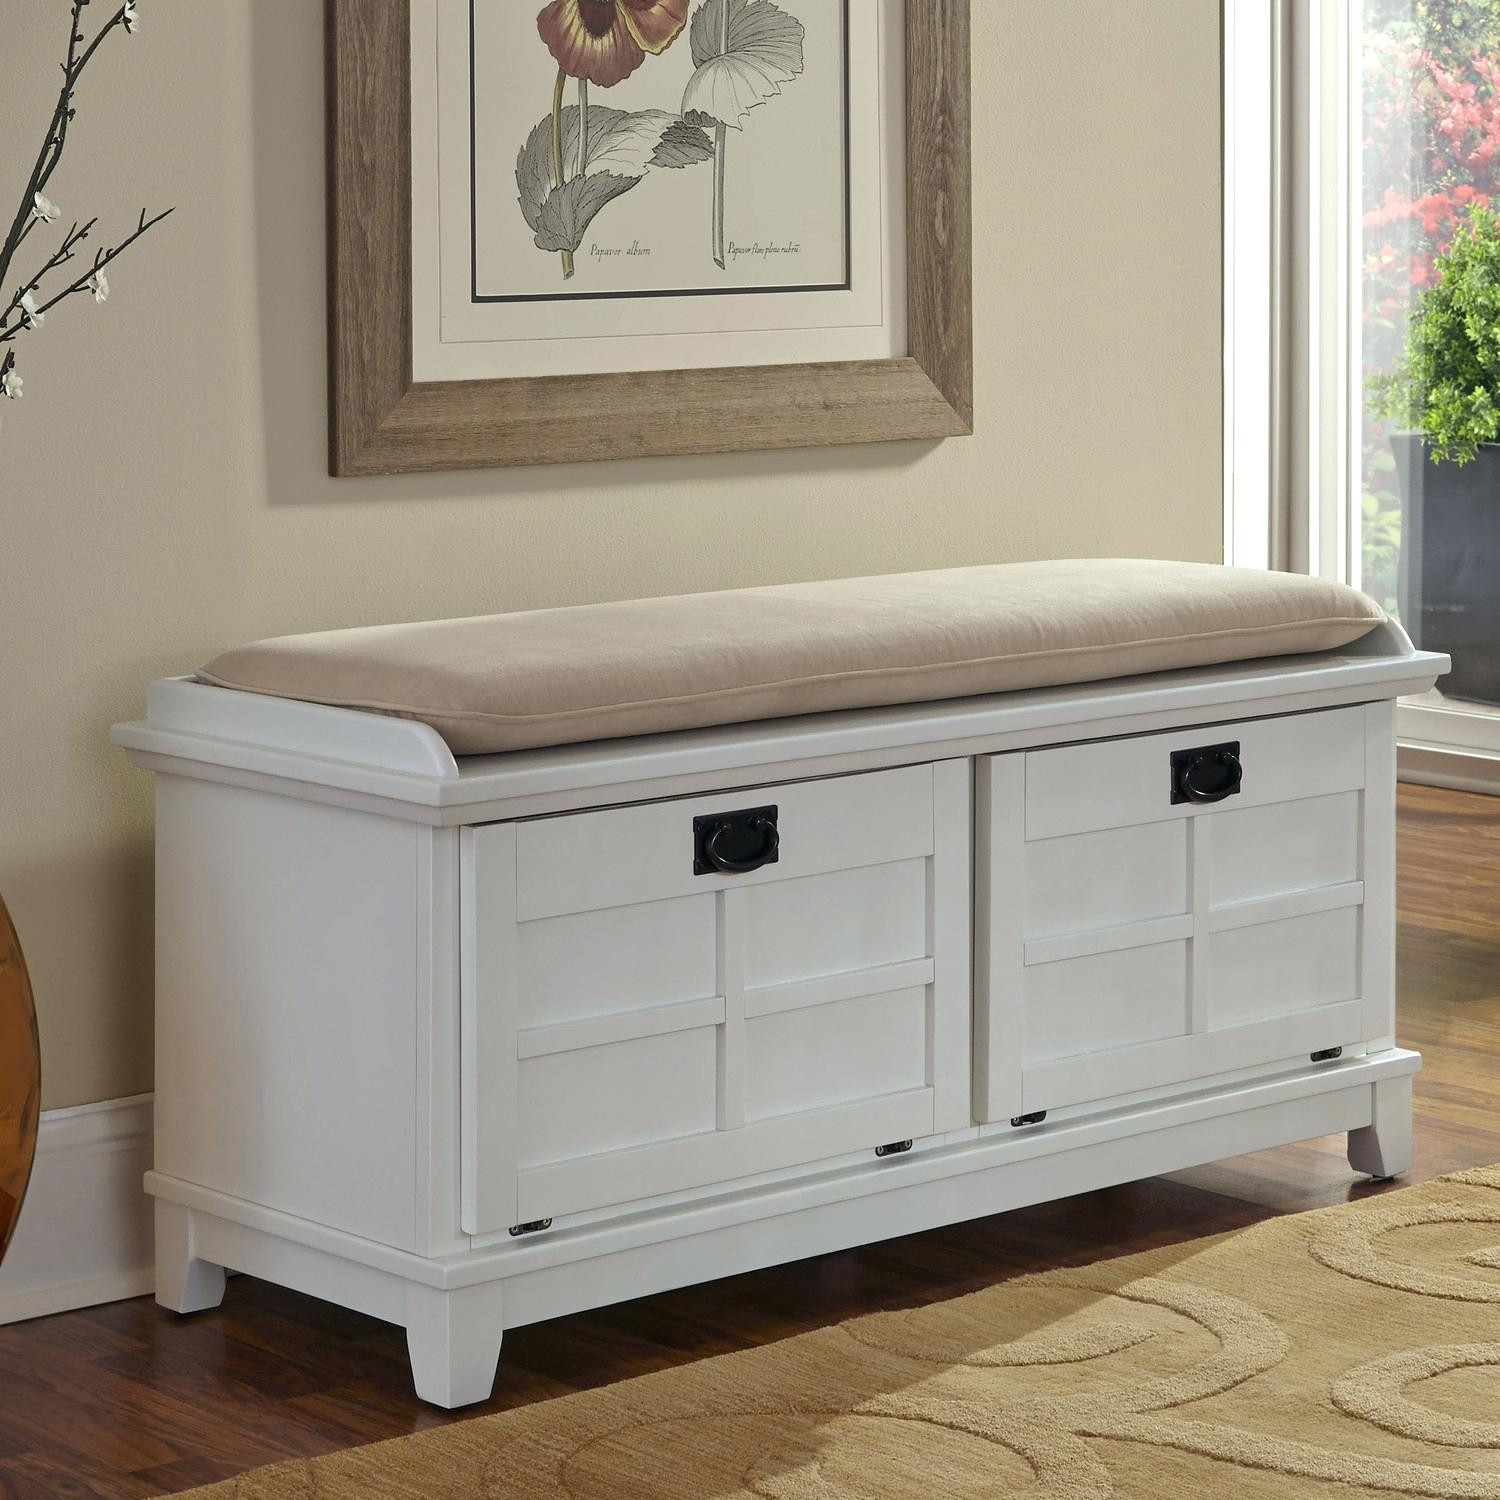 Front Entryway Storage Bench
 Front Hall Storage Bench